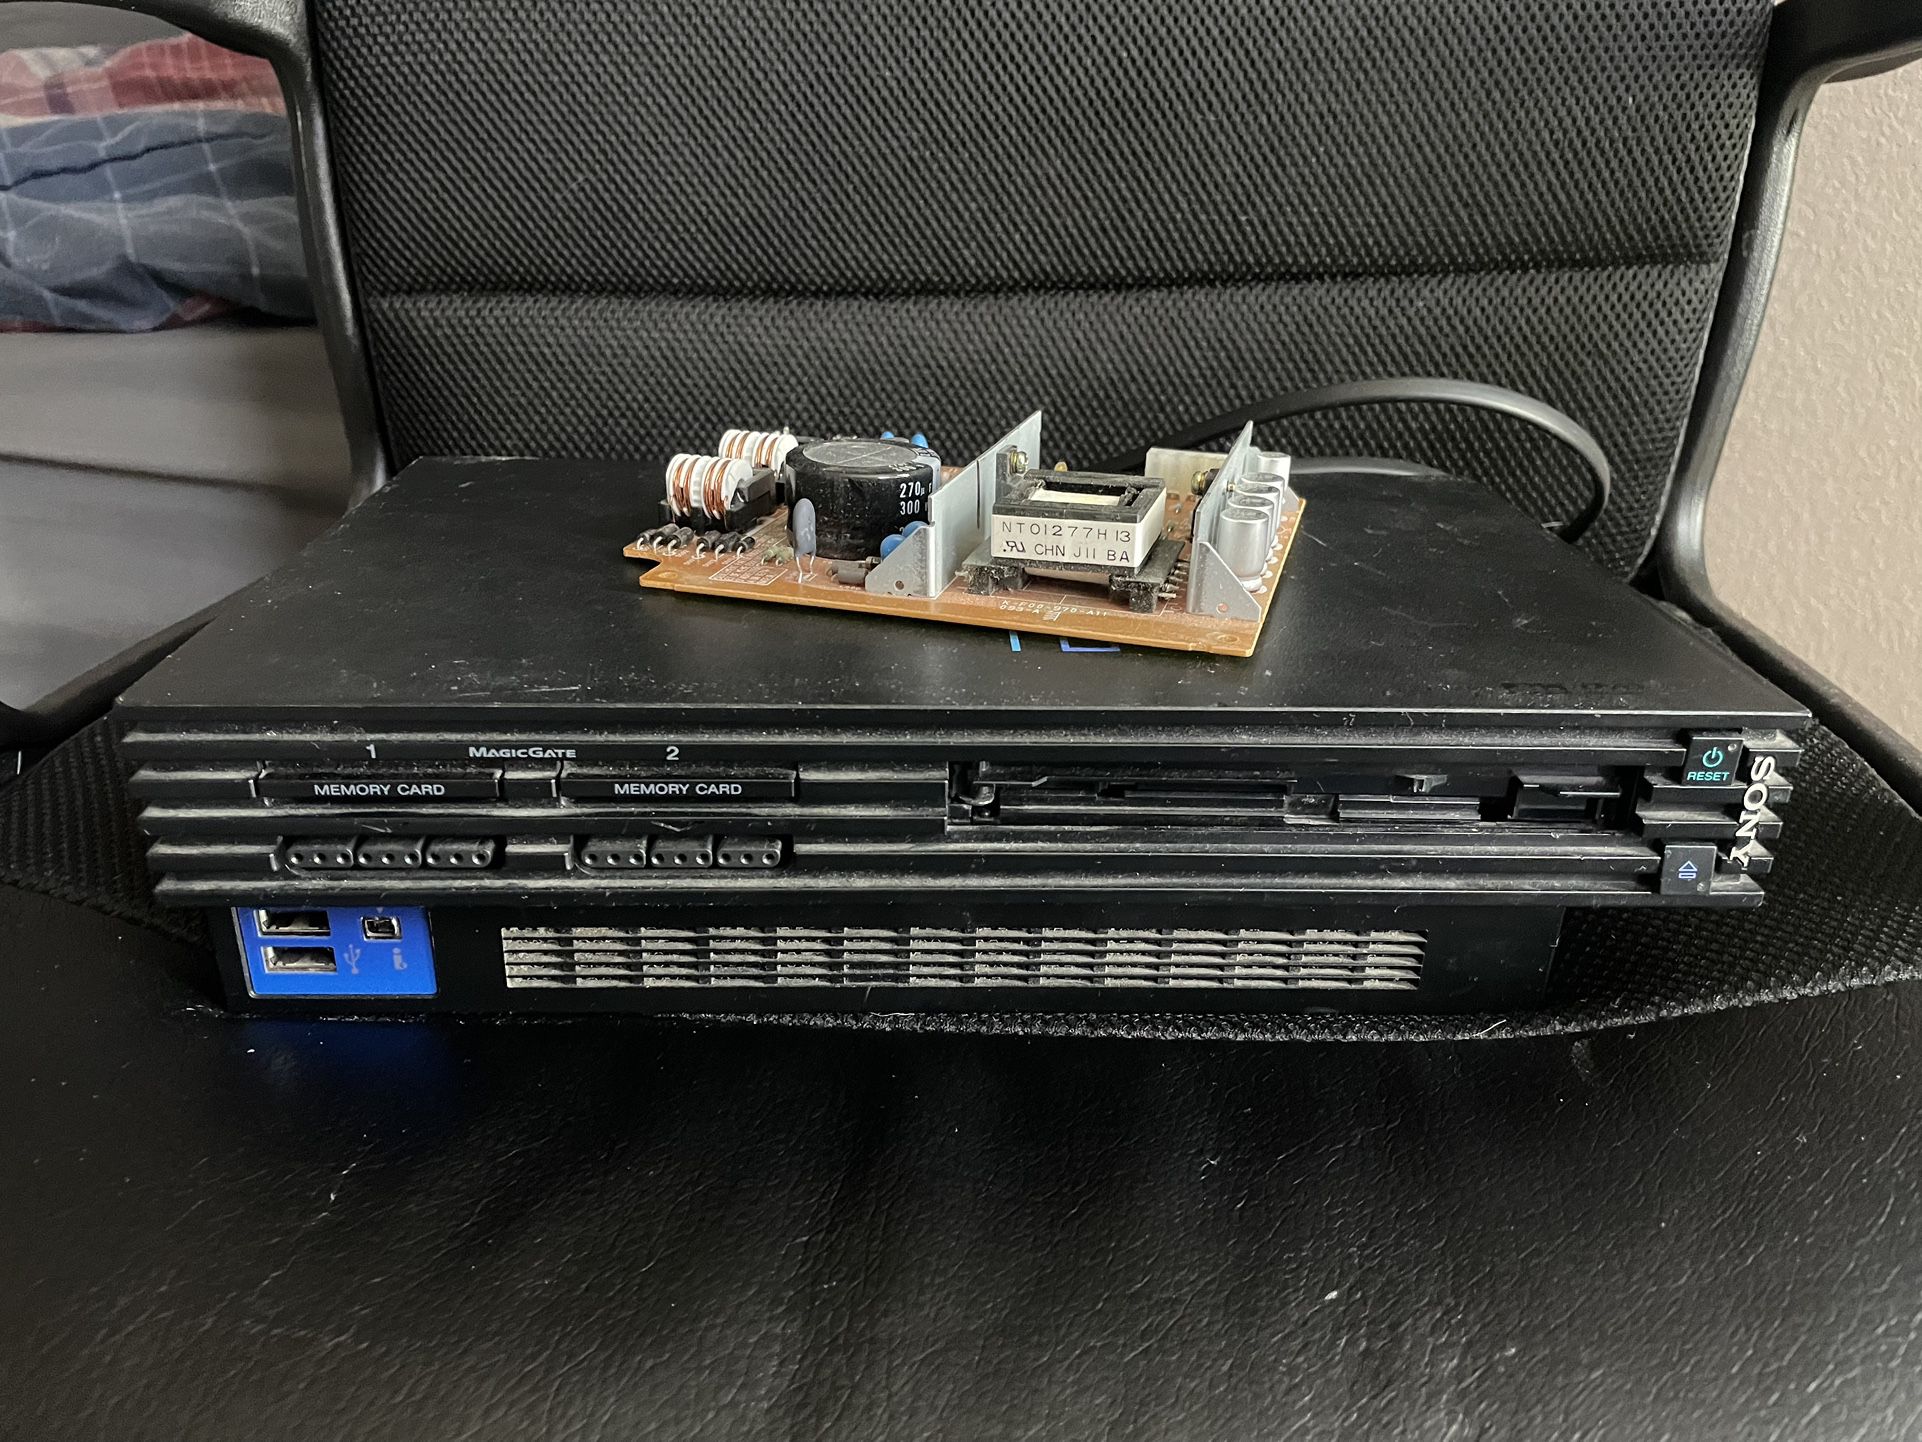 Ps2 For Parts Cash Or Trade 